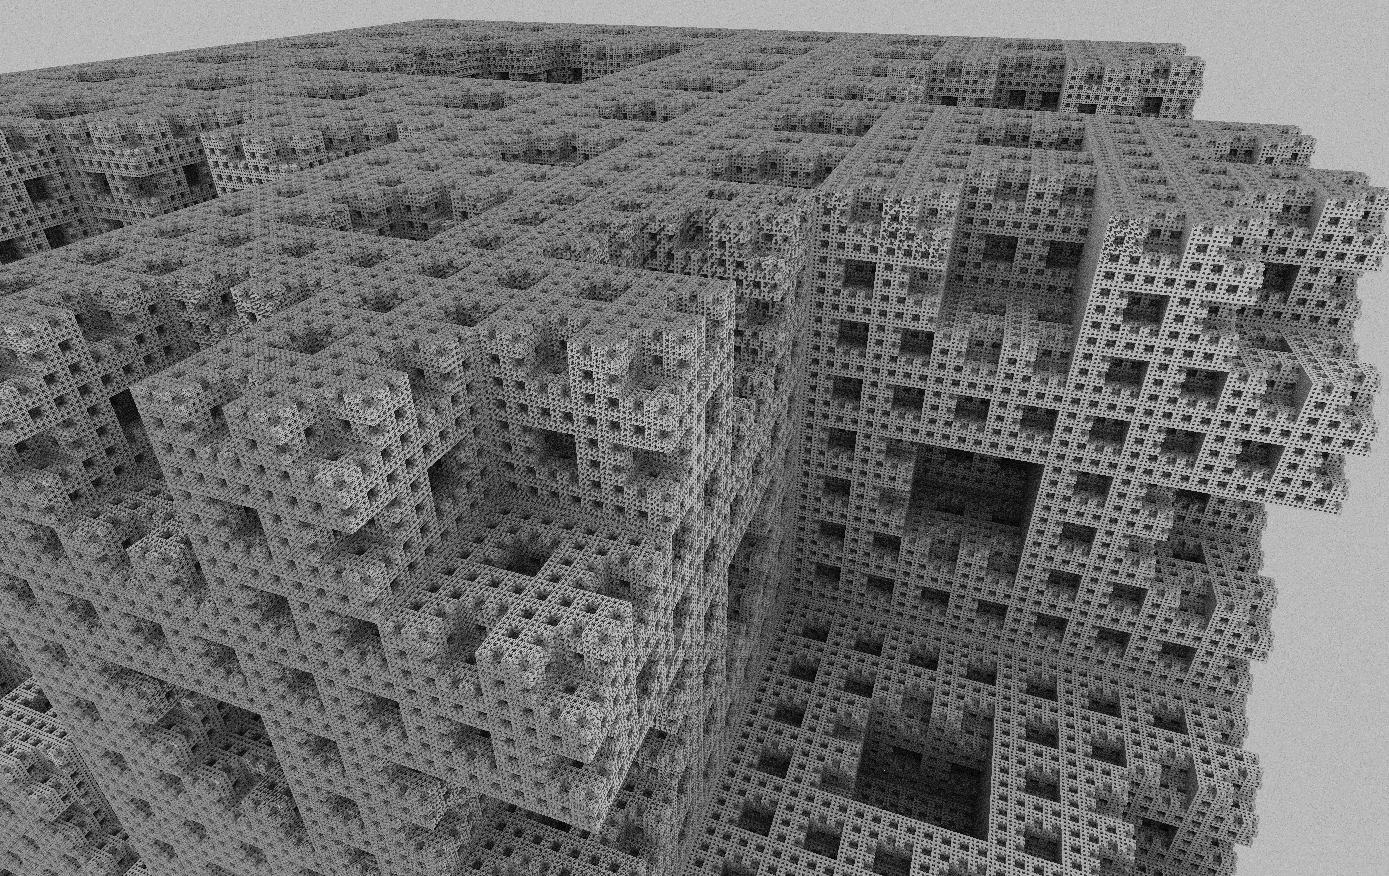 The cube fractal scene rendered in DAGger using path tracing